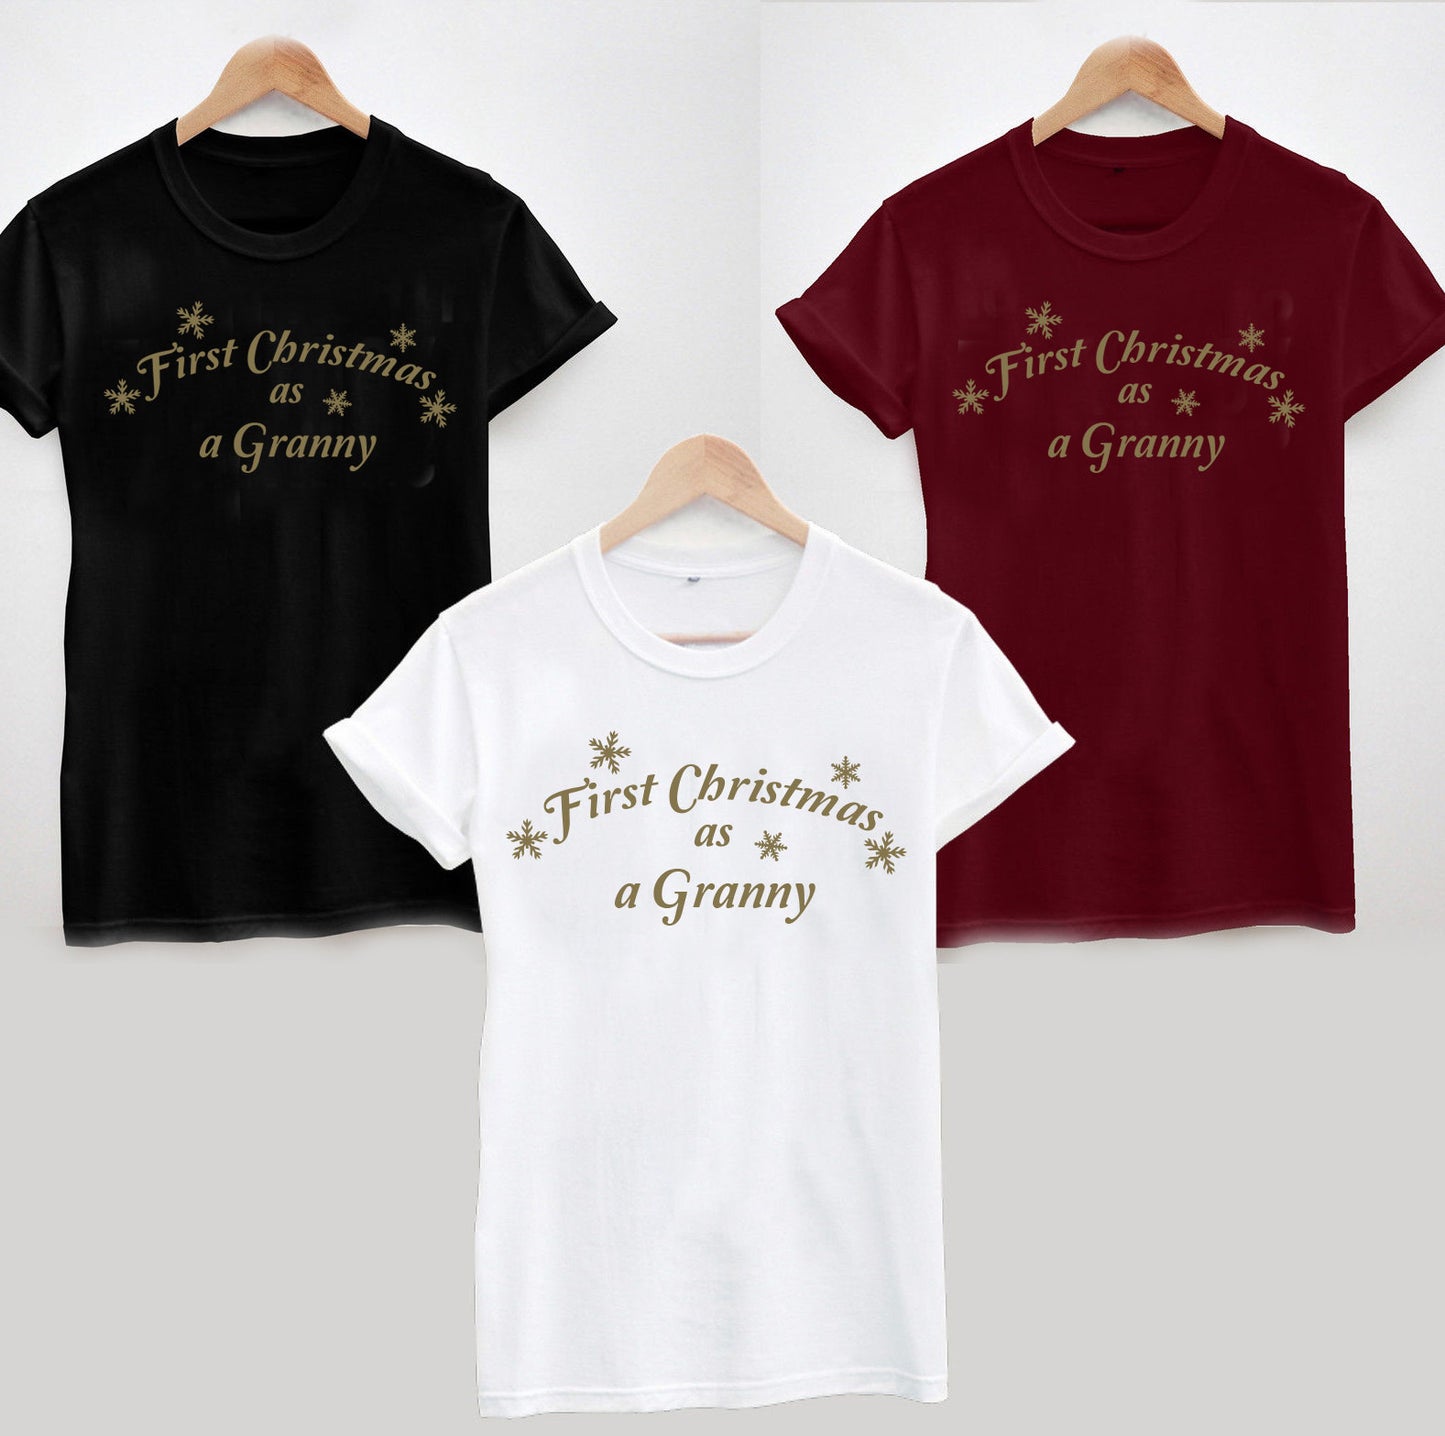 First Christmas as a Granny T-shirt, Gold Print - Can be changed to Gran or Grandma or any other variation